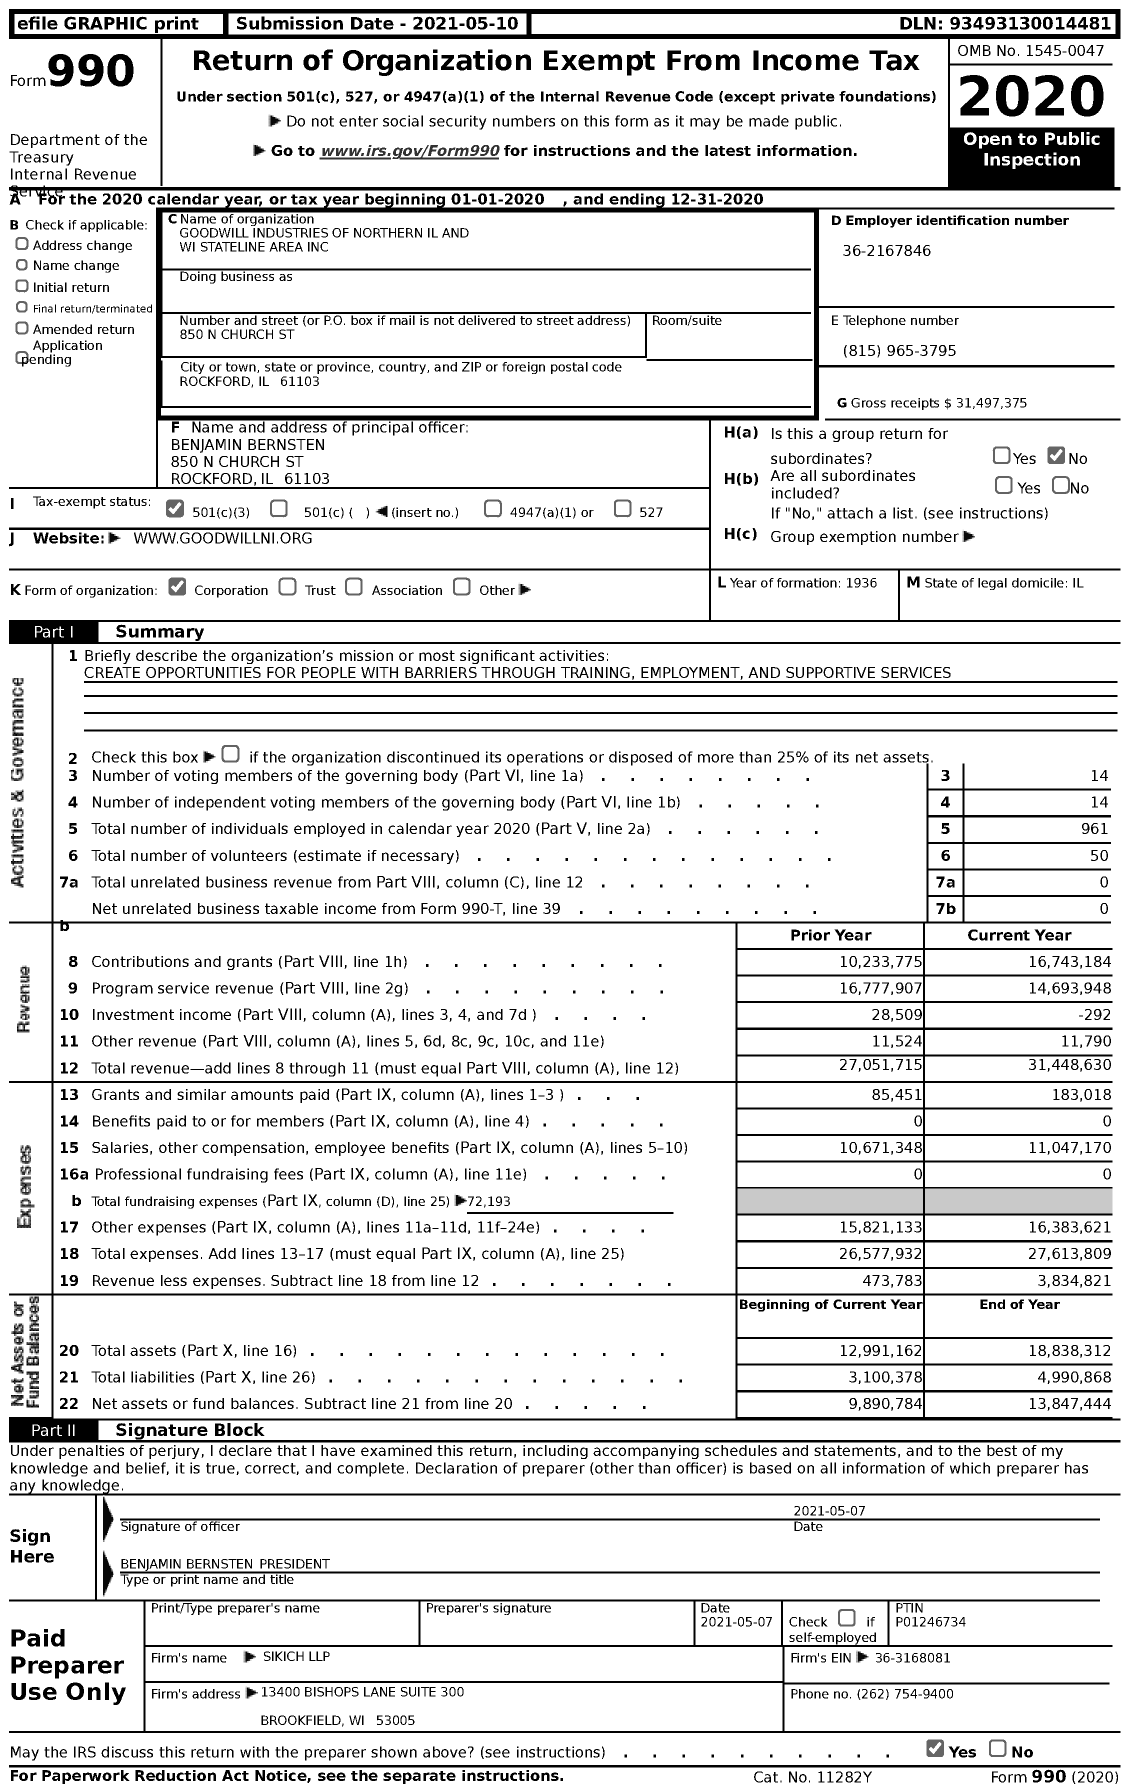 Image of first page of 2020 Form 990 for Goodwill Industries of Northern Illinois & Wisconsin Stateline Area